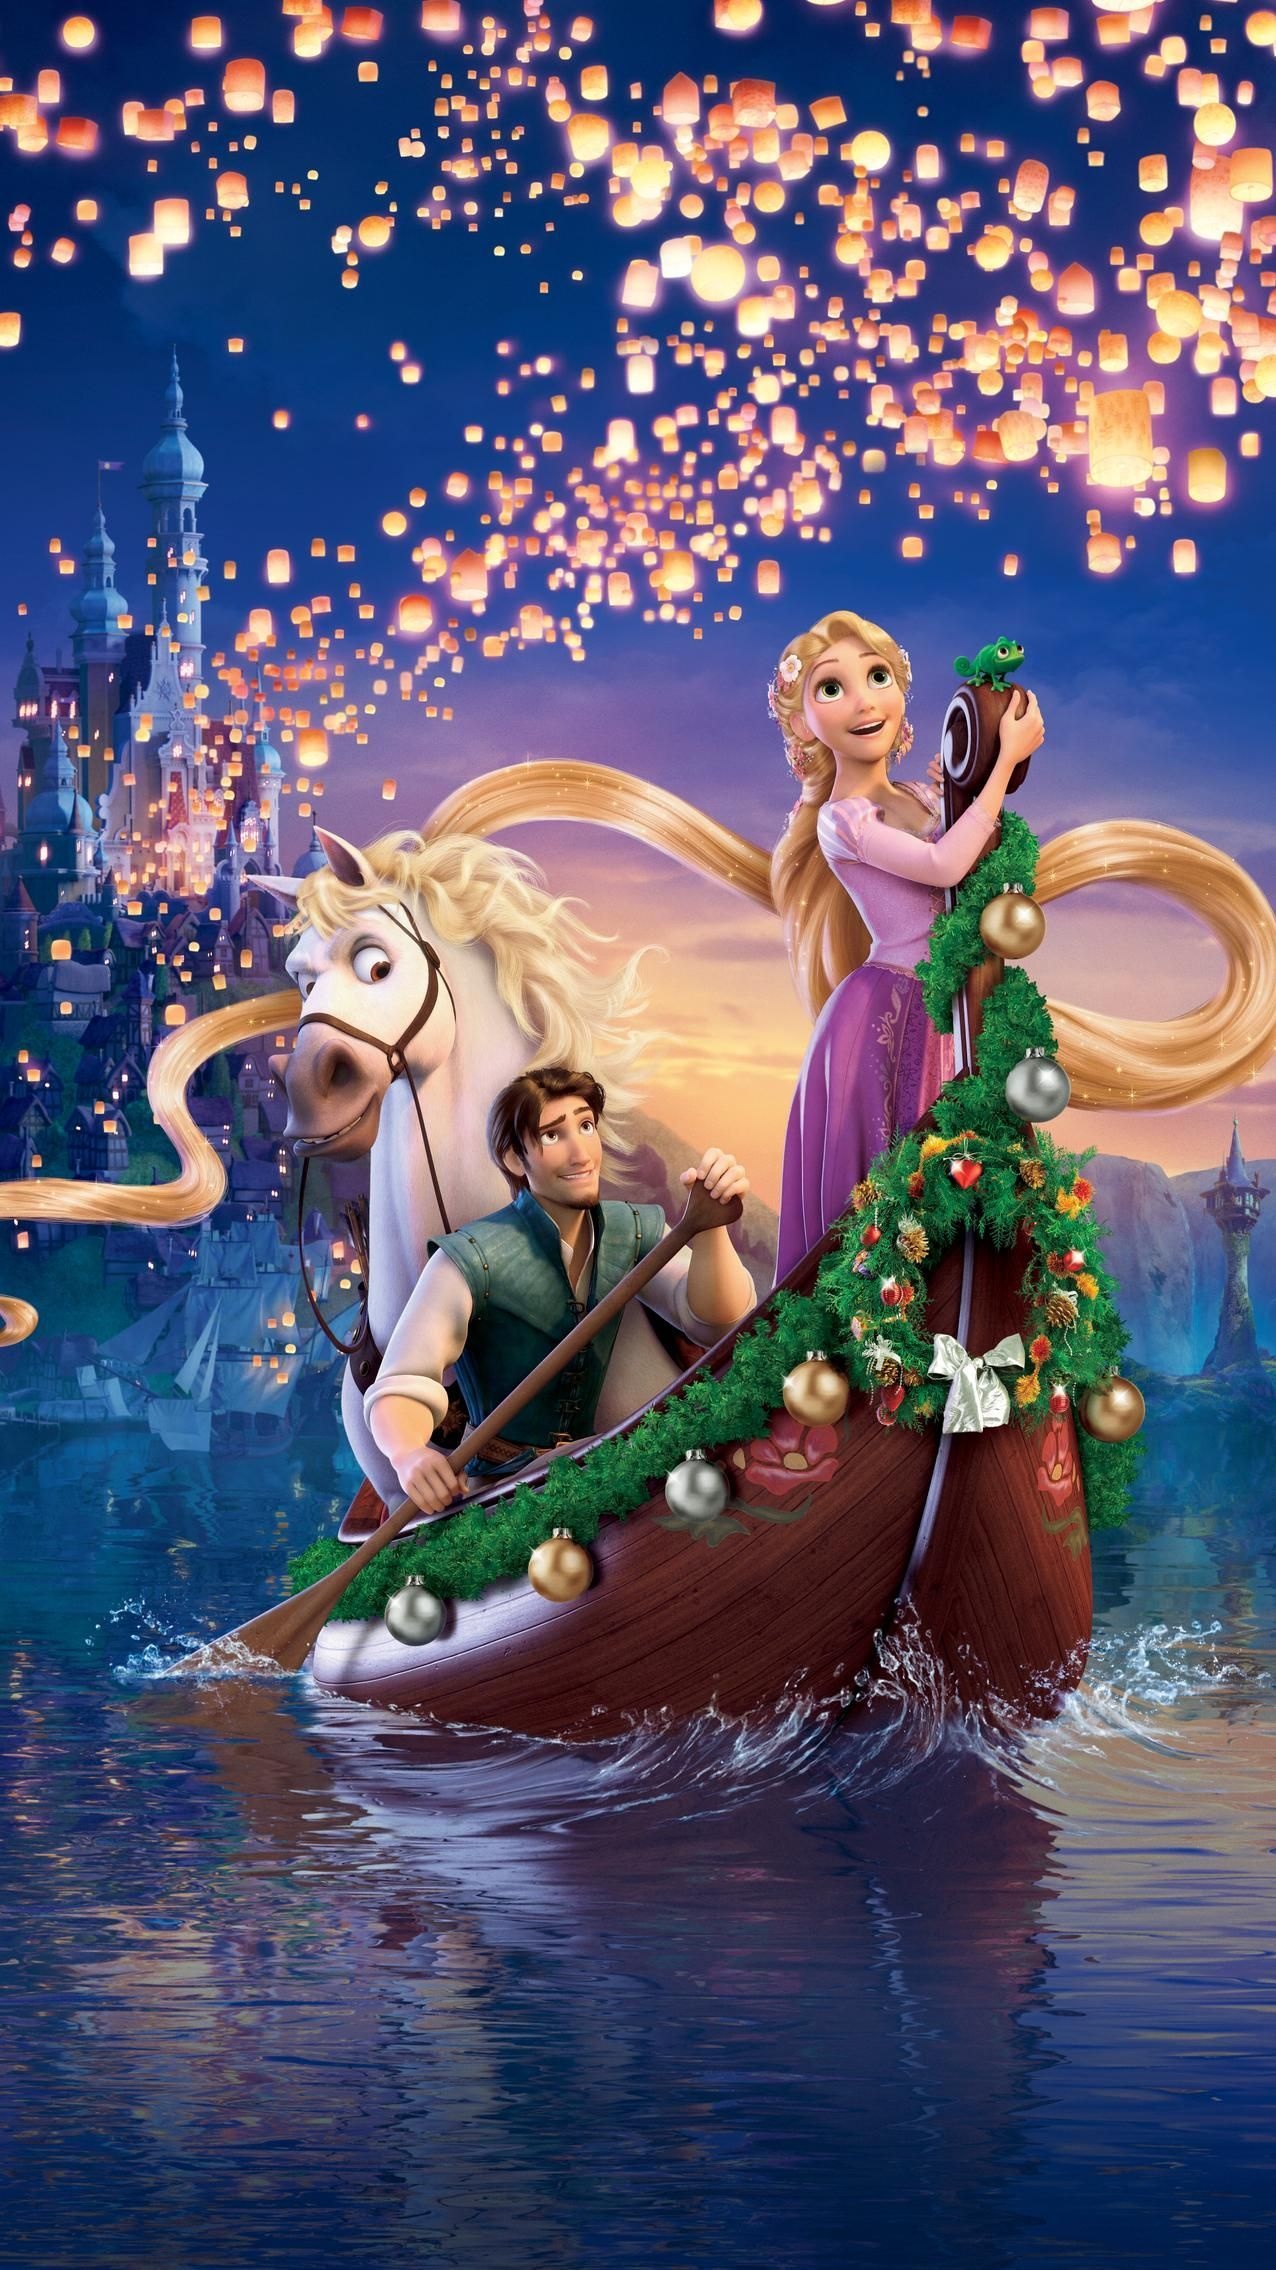 Phone wallpapers, Rapunzel theme, Mobile backgrounds, Stunning designs, 1280x2270 HD Phone